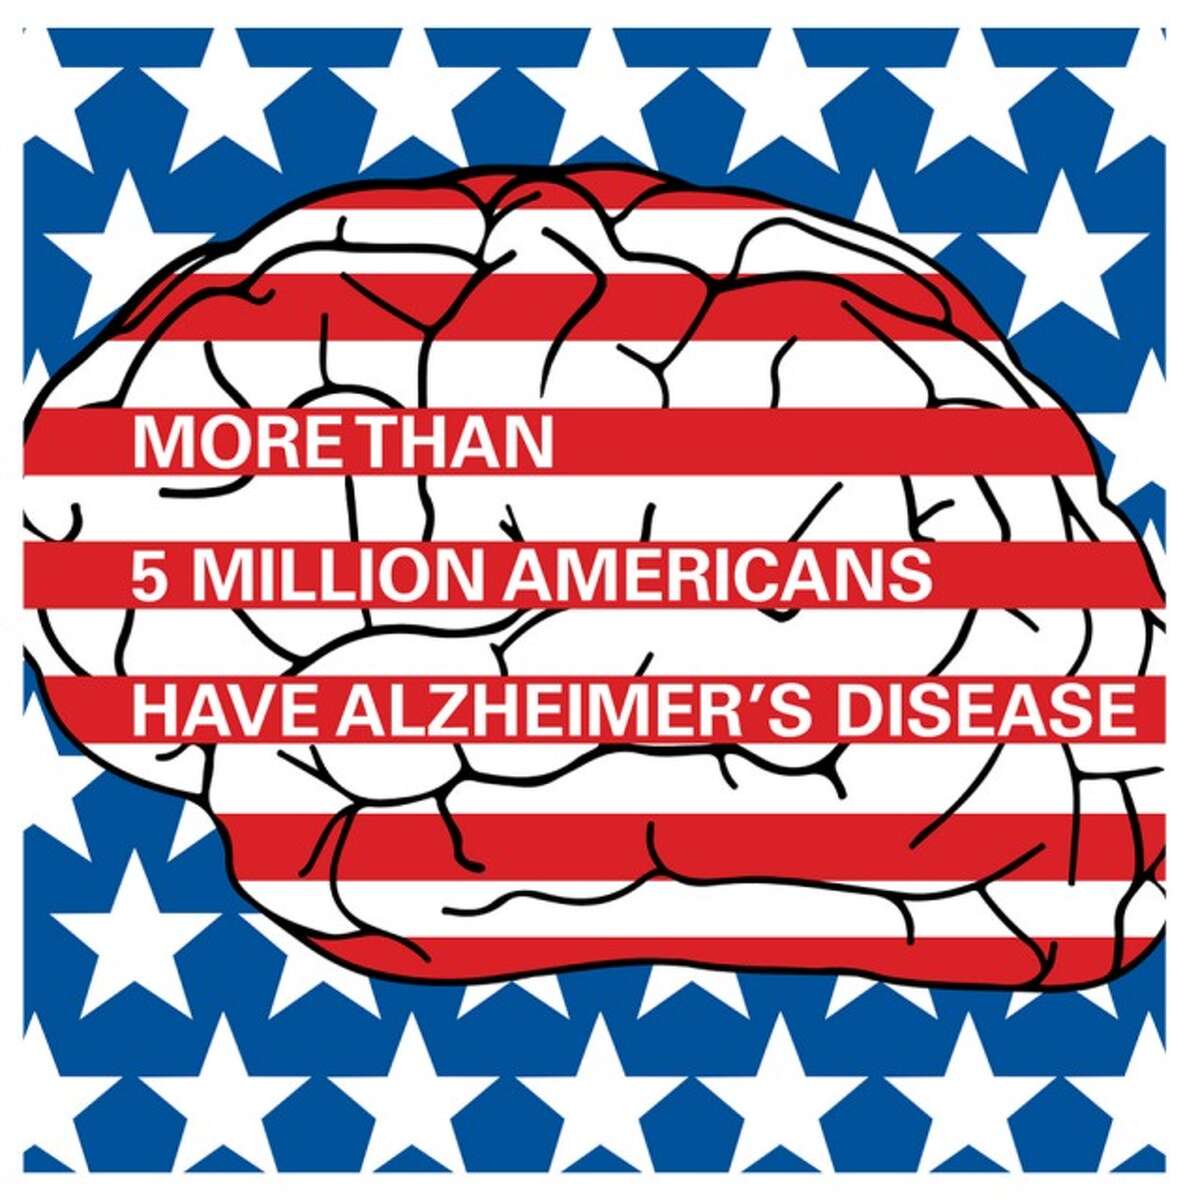 The Alzheimer's Association shows the facts about the disease.